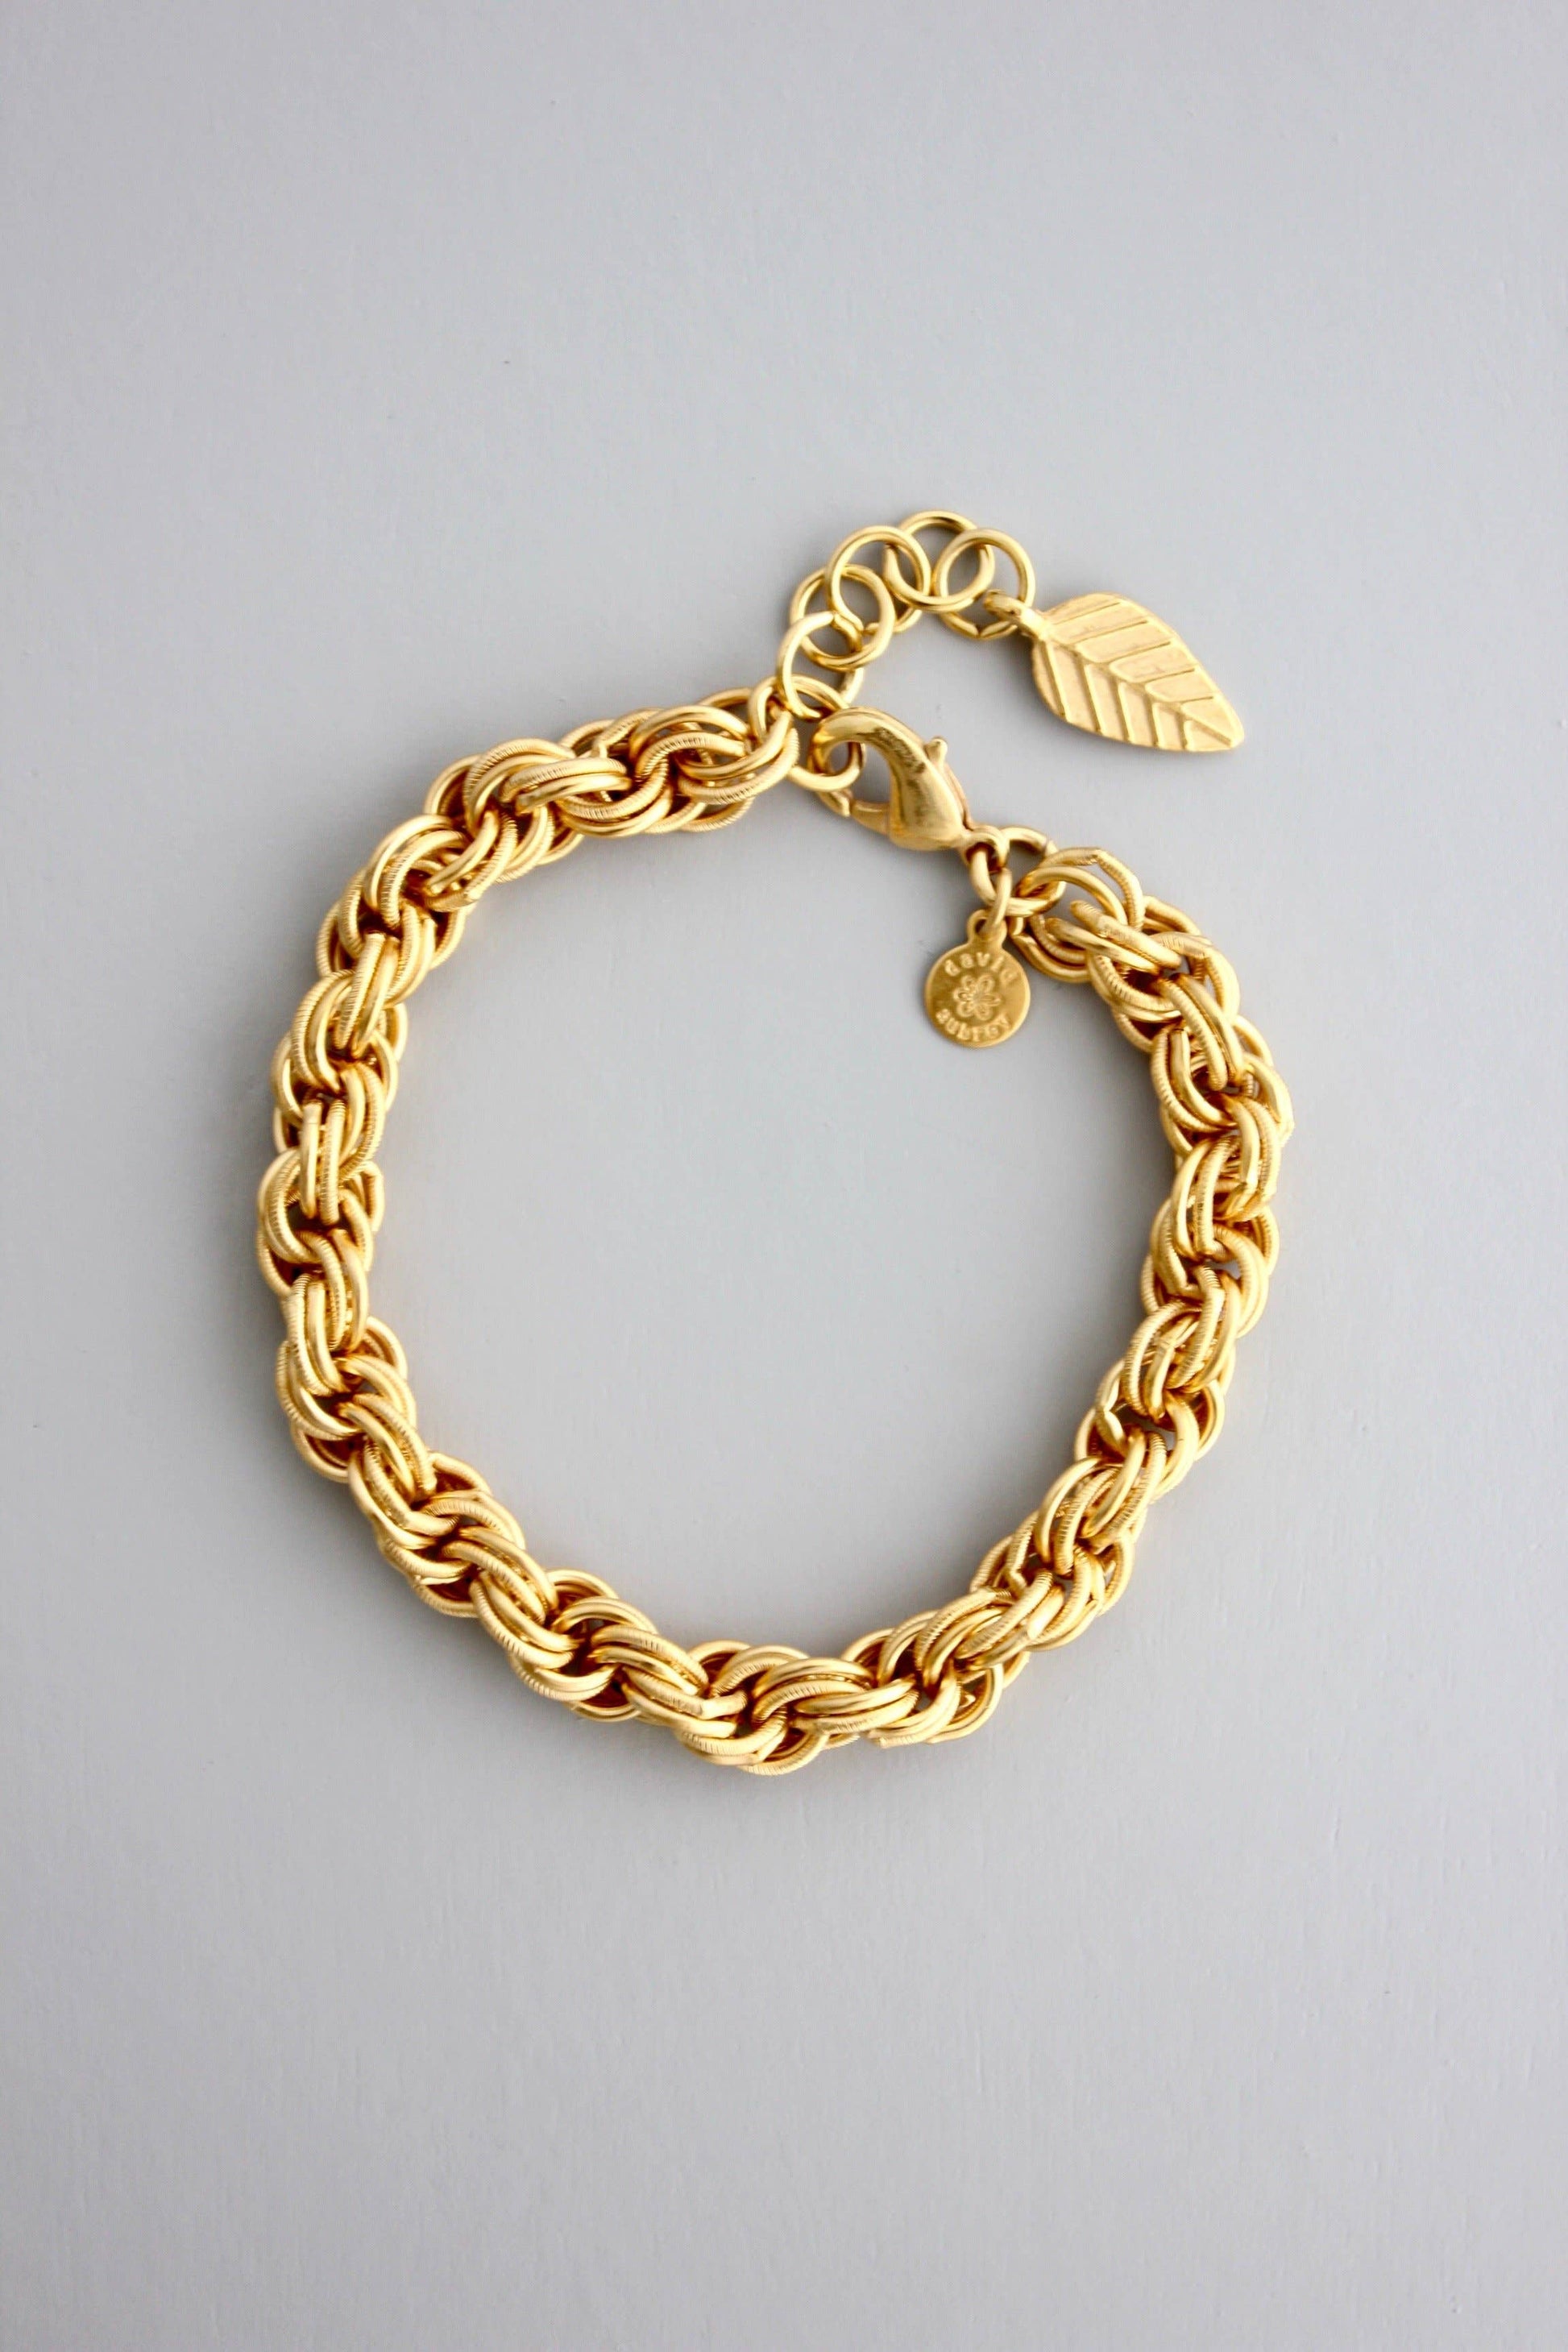 18k gold plated brass chain bracelet with one inch extender against a light grey background